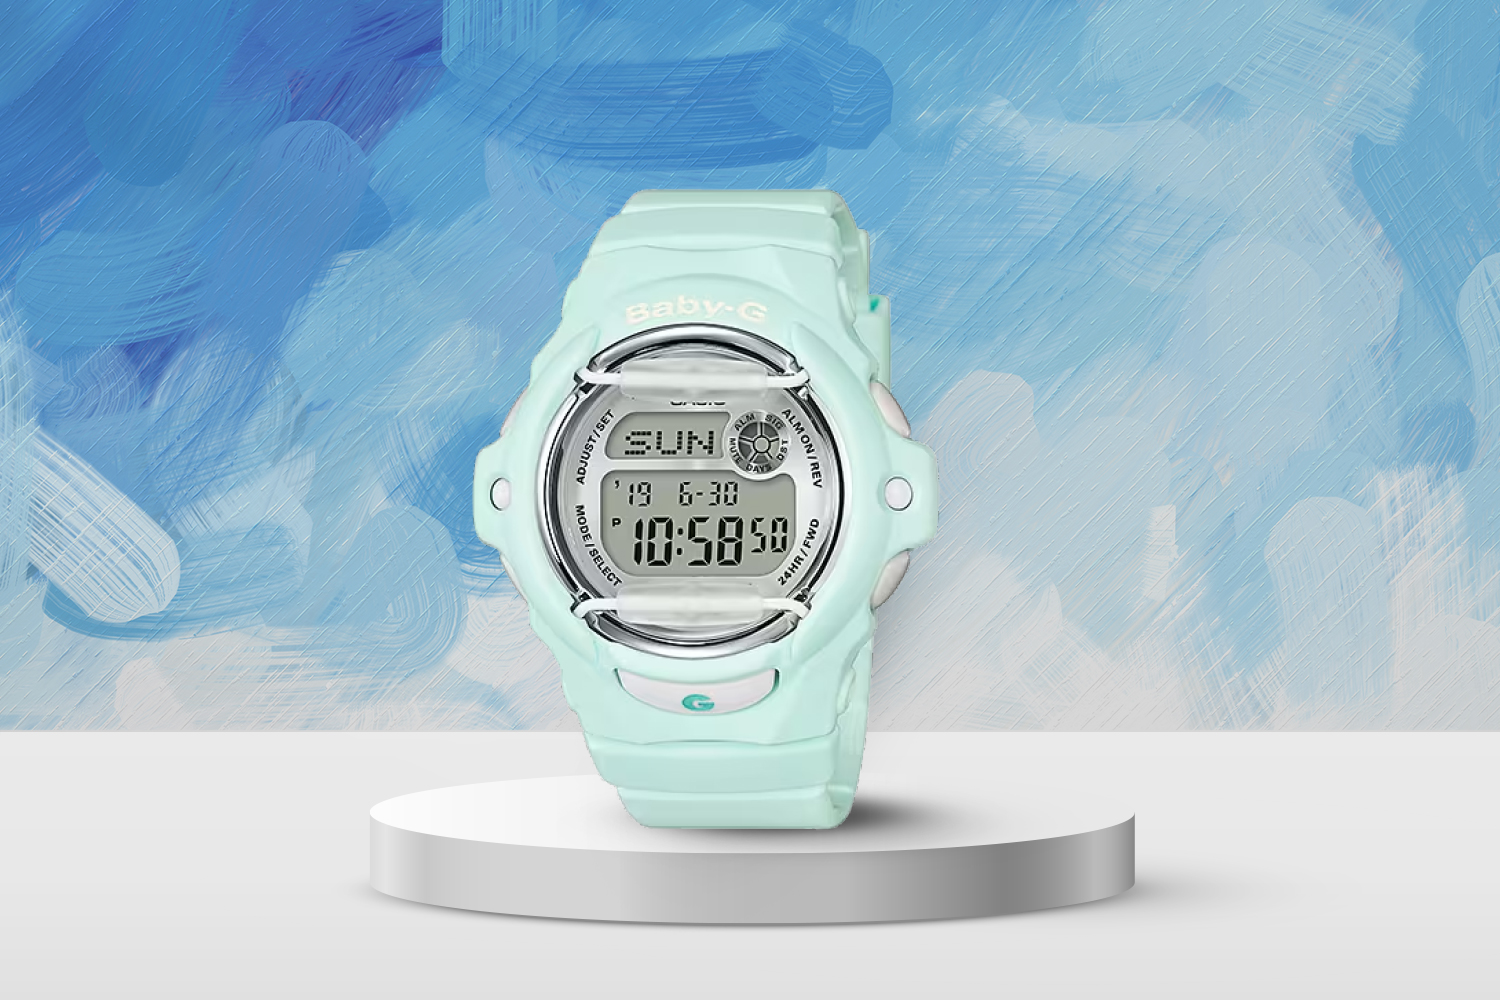 teal colored watch with white face